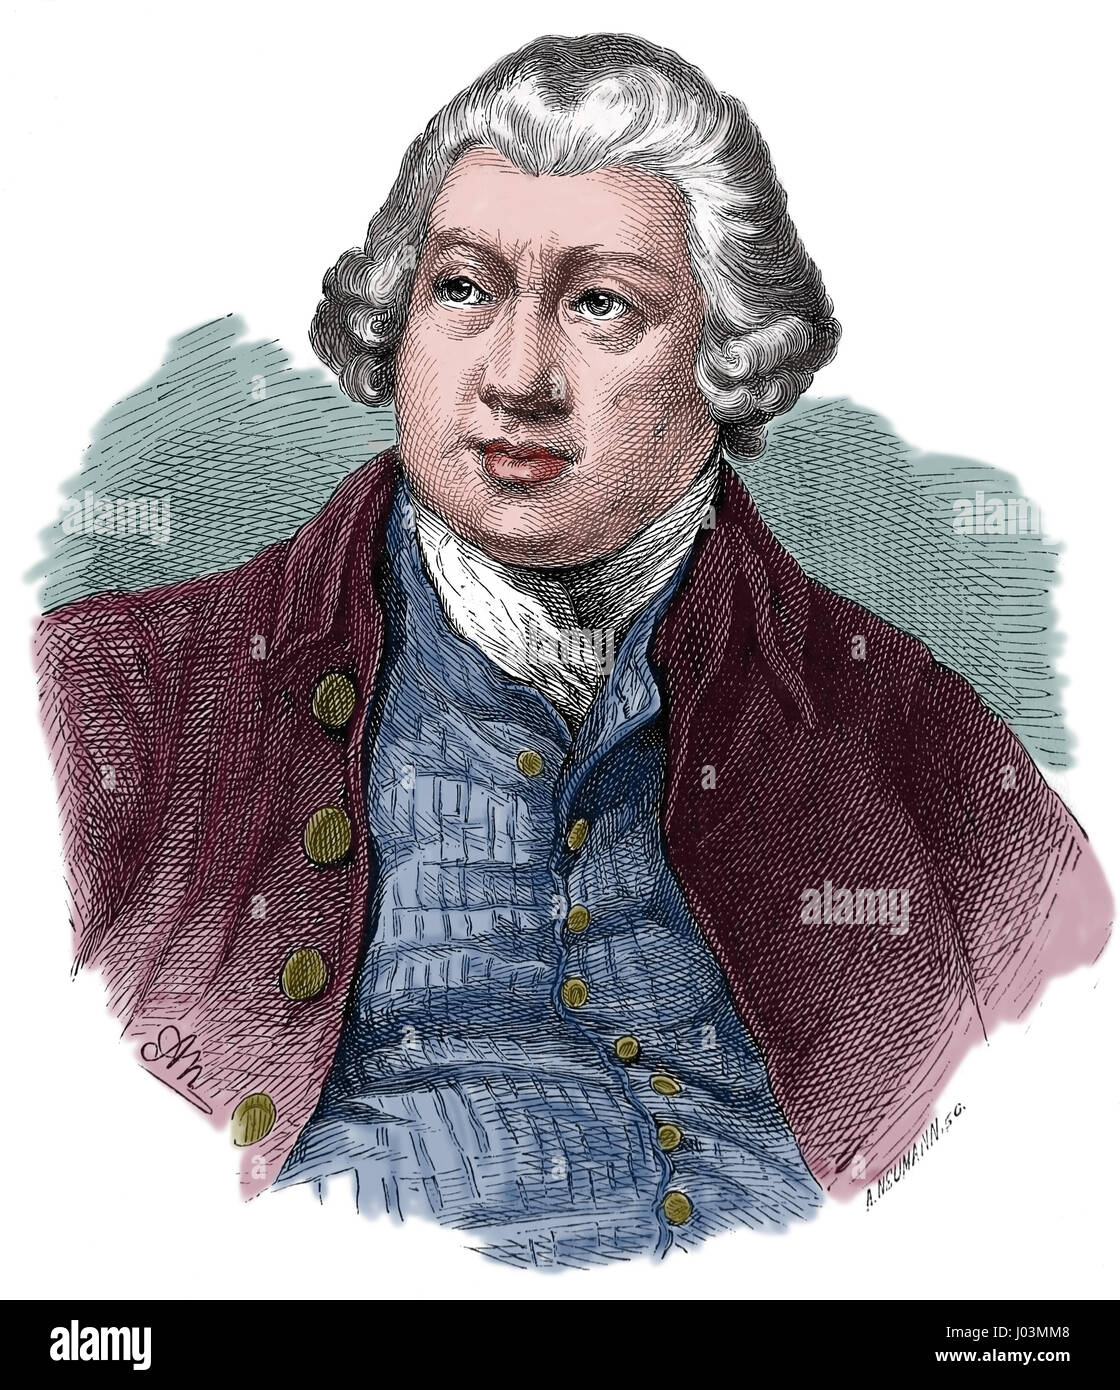 Richard Arkwright (1732-1792). Inventing the spinning frame. Engraving. Nuestro Siglo, 1883. Spanish edition. Color. Stock Photo